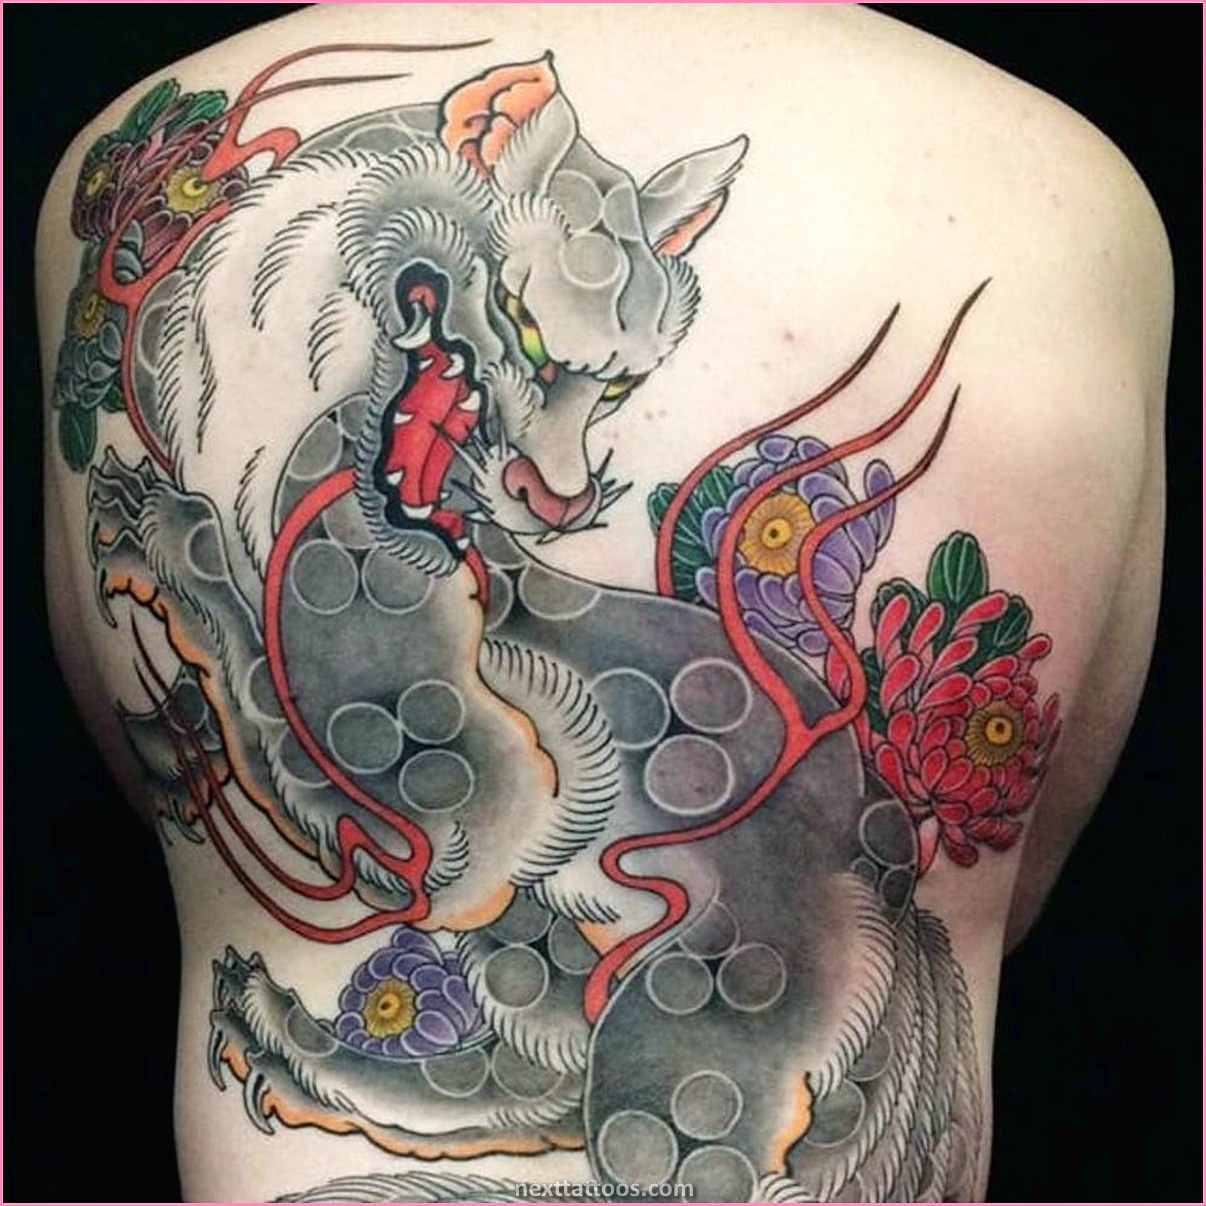 Chinese Animal Tattoos - What Chinese Animal Tattoos Really Mean